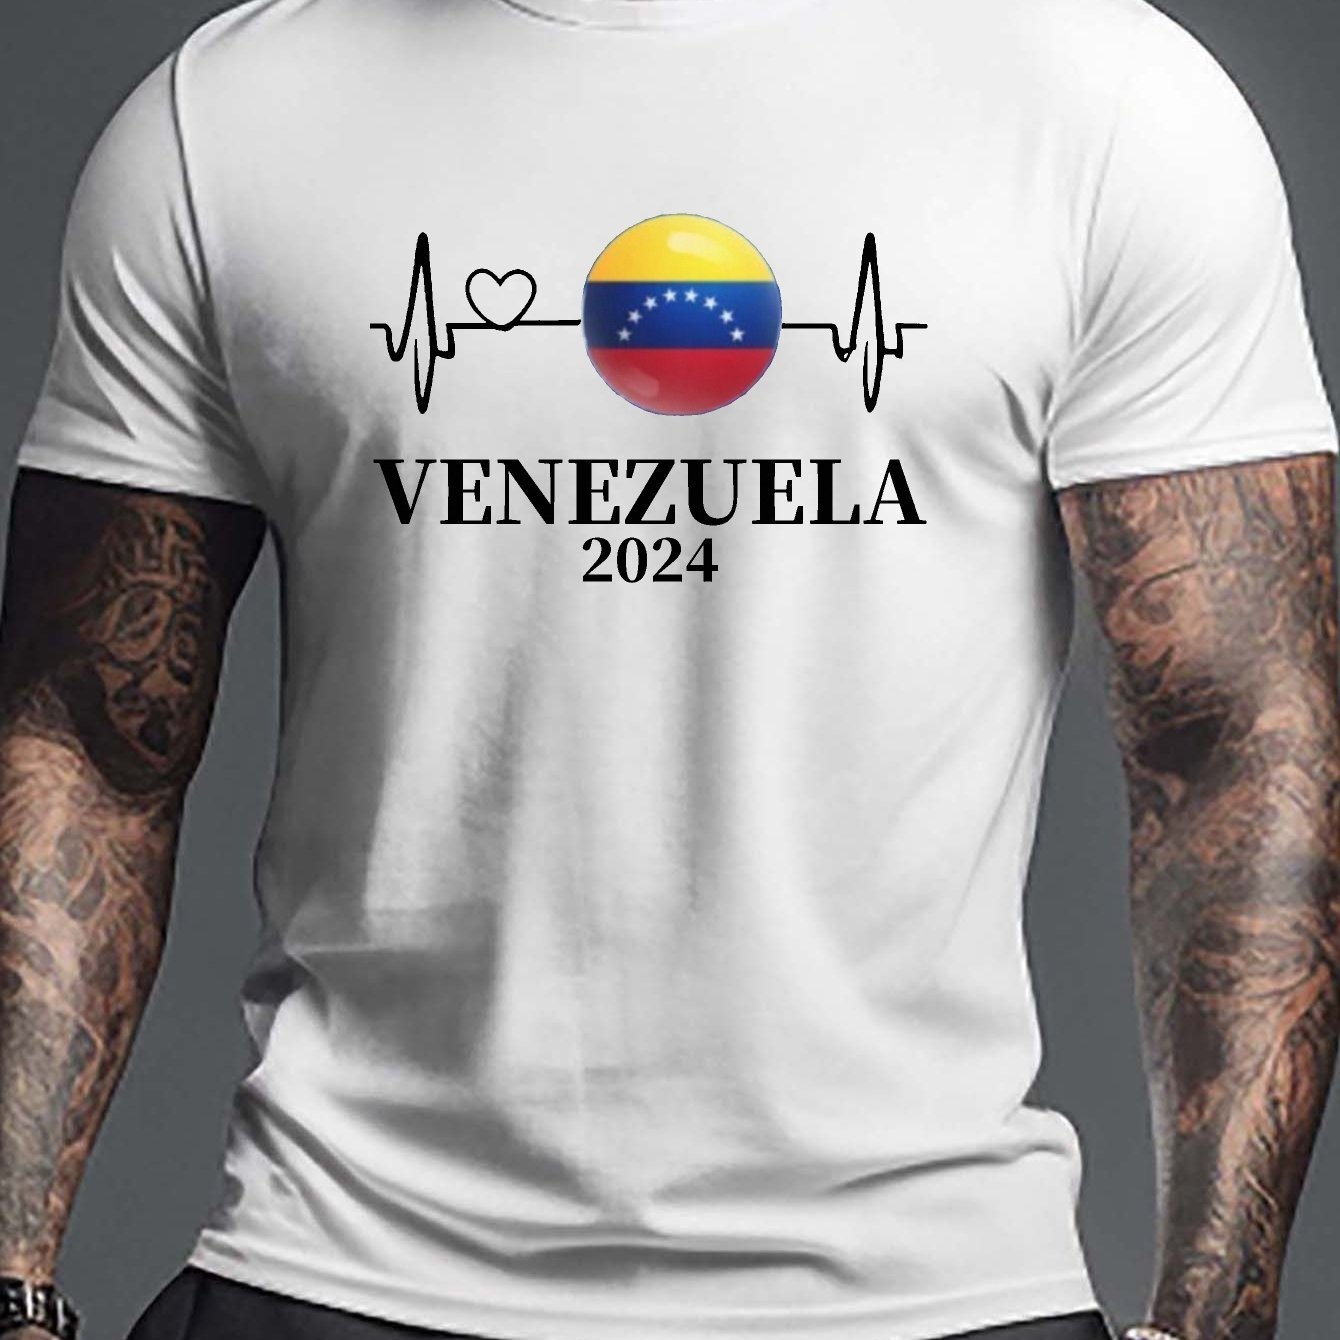 

Large Men's Summer T-shirt, Venezuela National Graphic Printing Short-sleeved T-shirt, Fashionable Casual Shirt, Suitable For Daily Life, Large And High